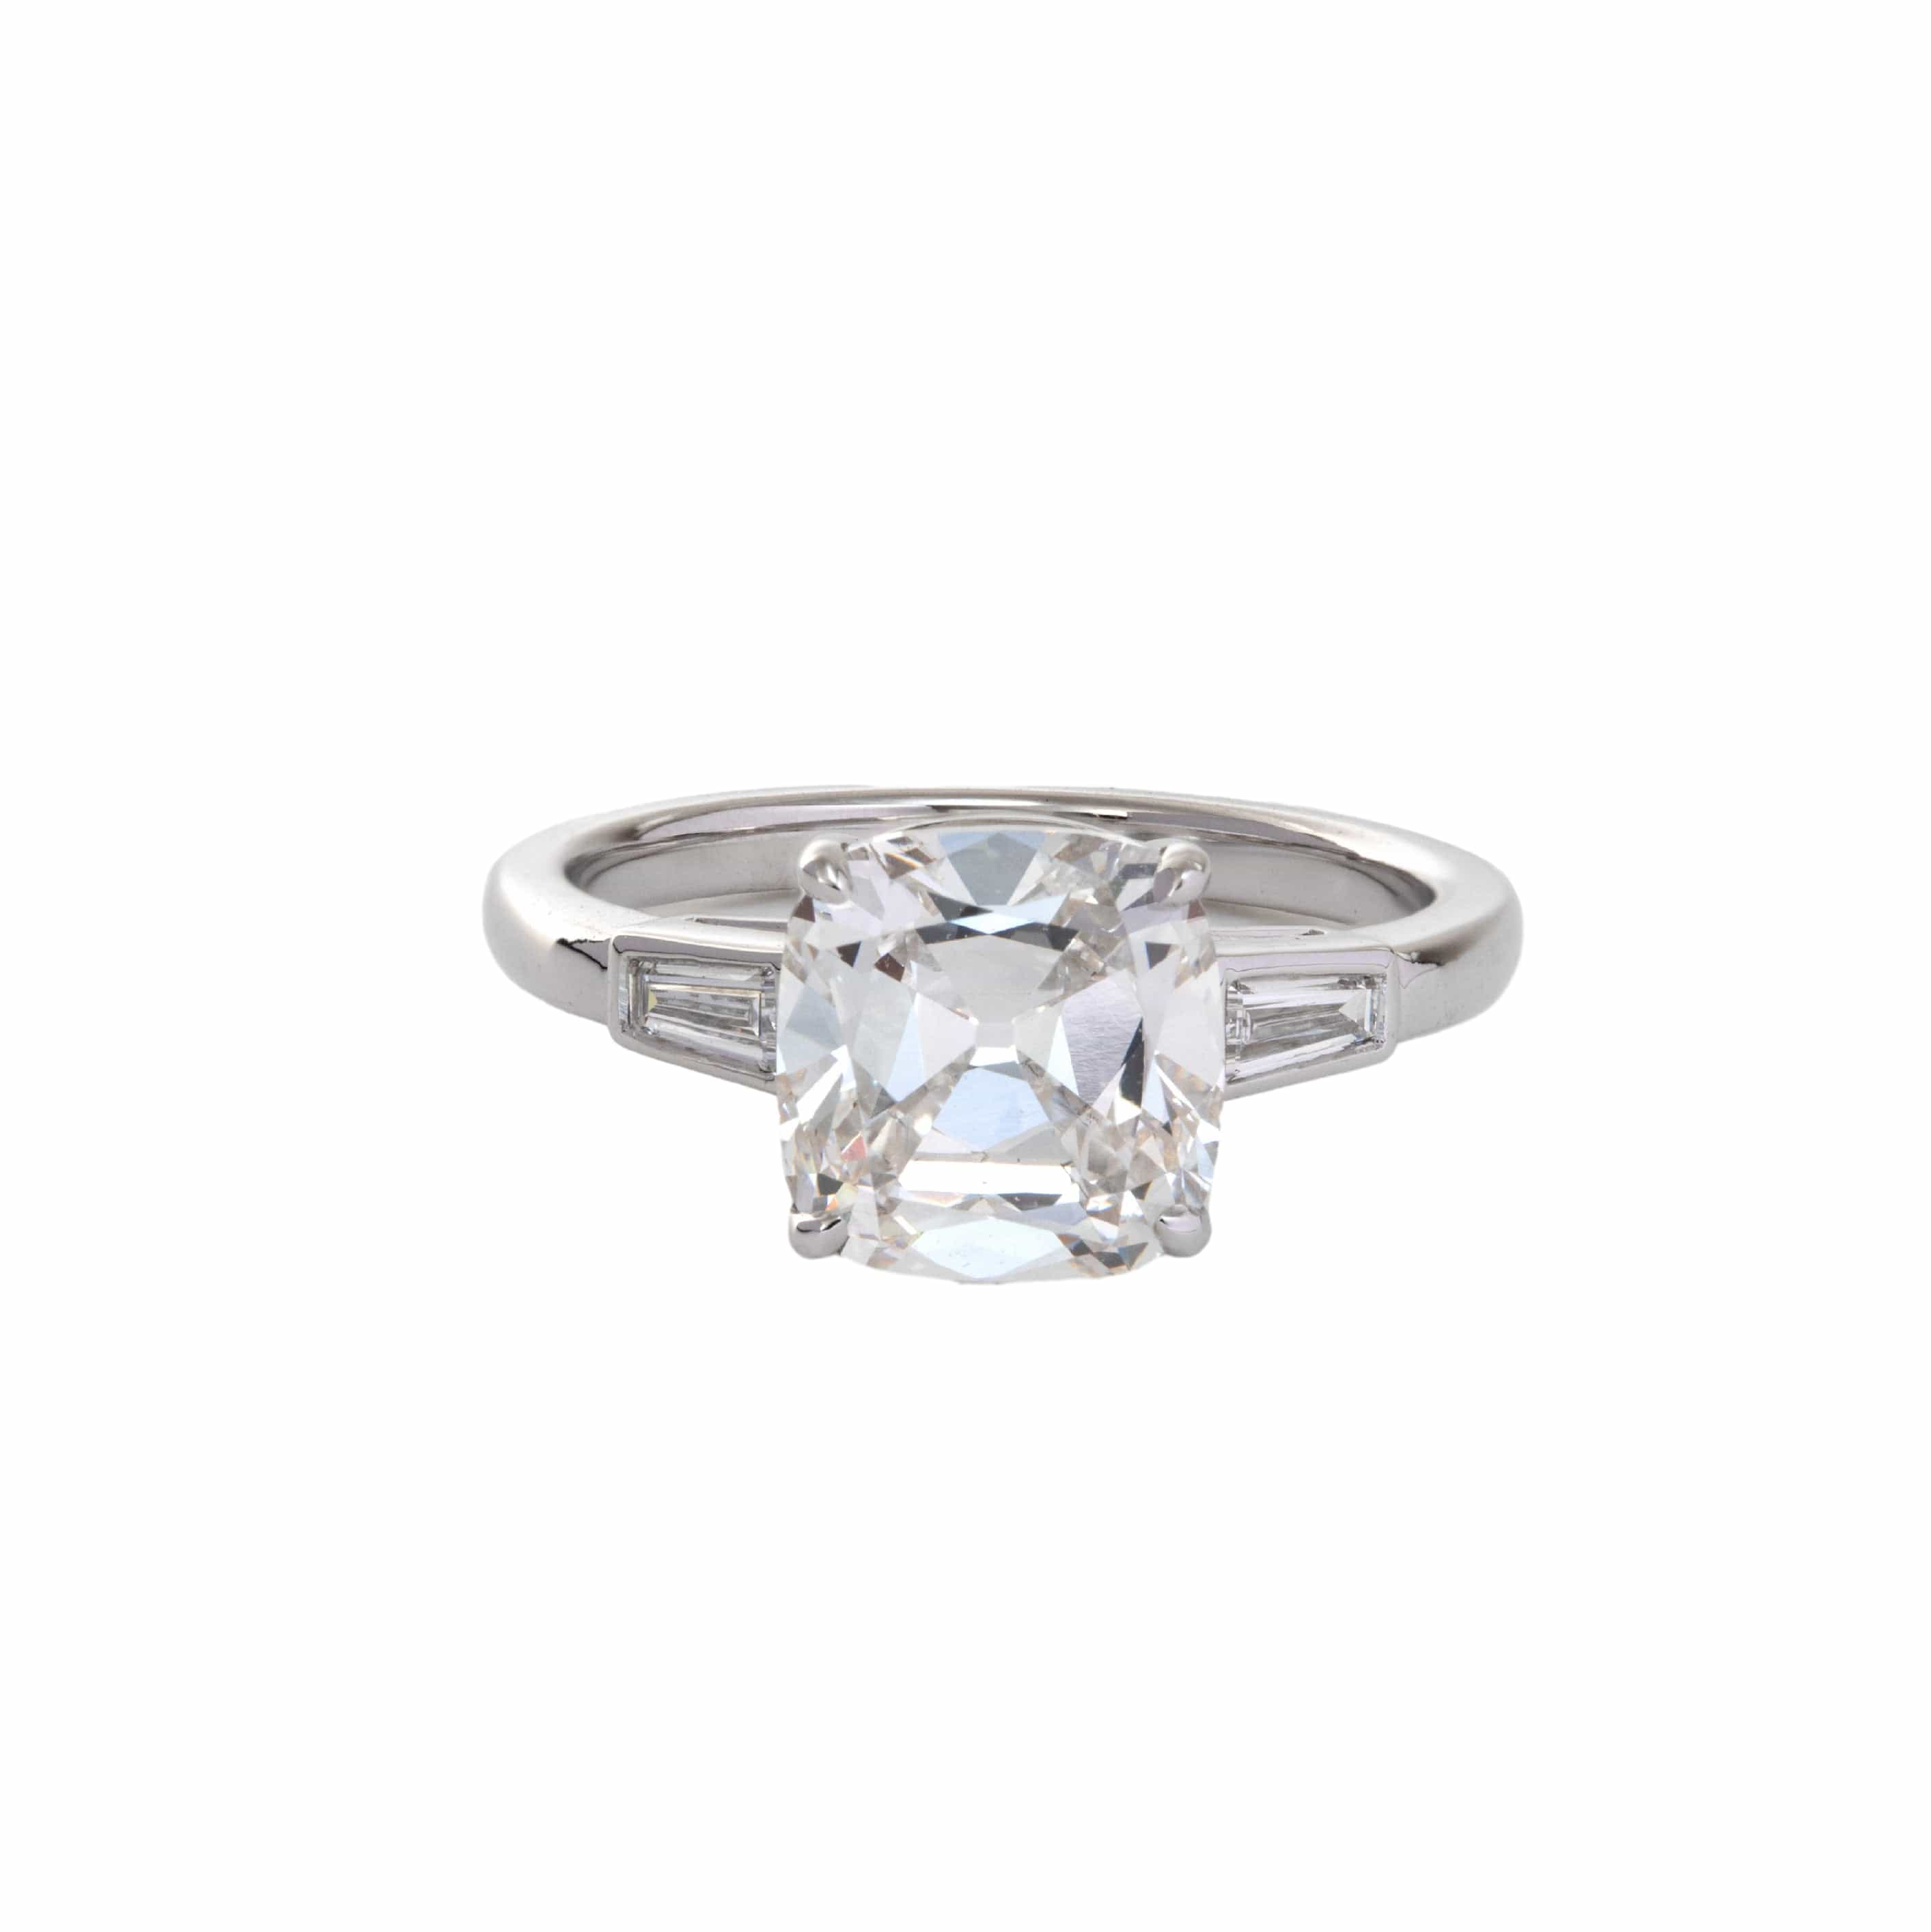 14K White Gold Old Mine Cut Lab Diamond & Tapered Baguette Three-stone Engagement Ring